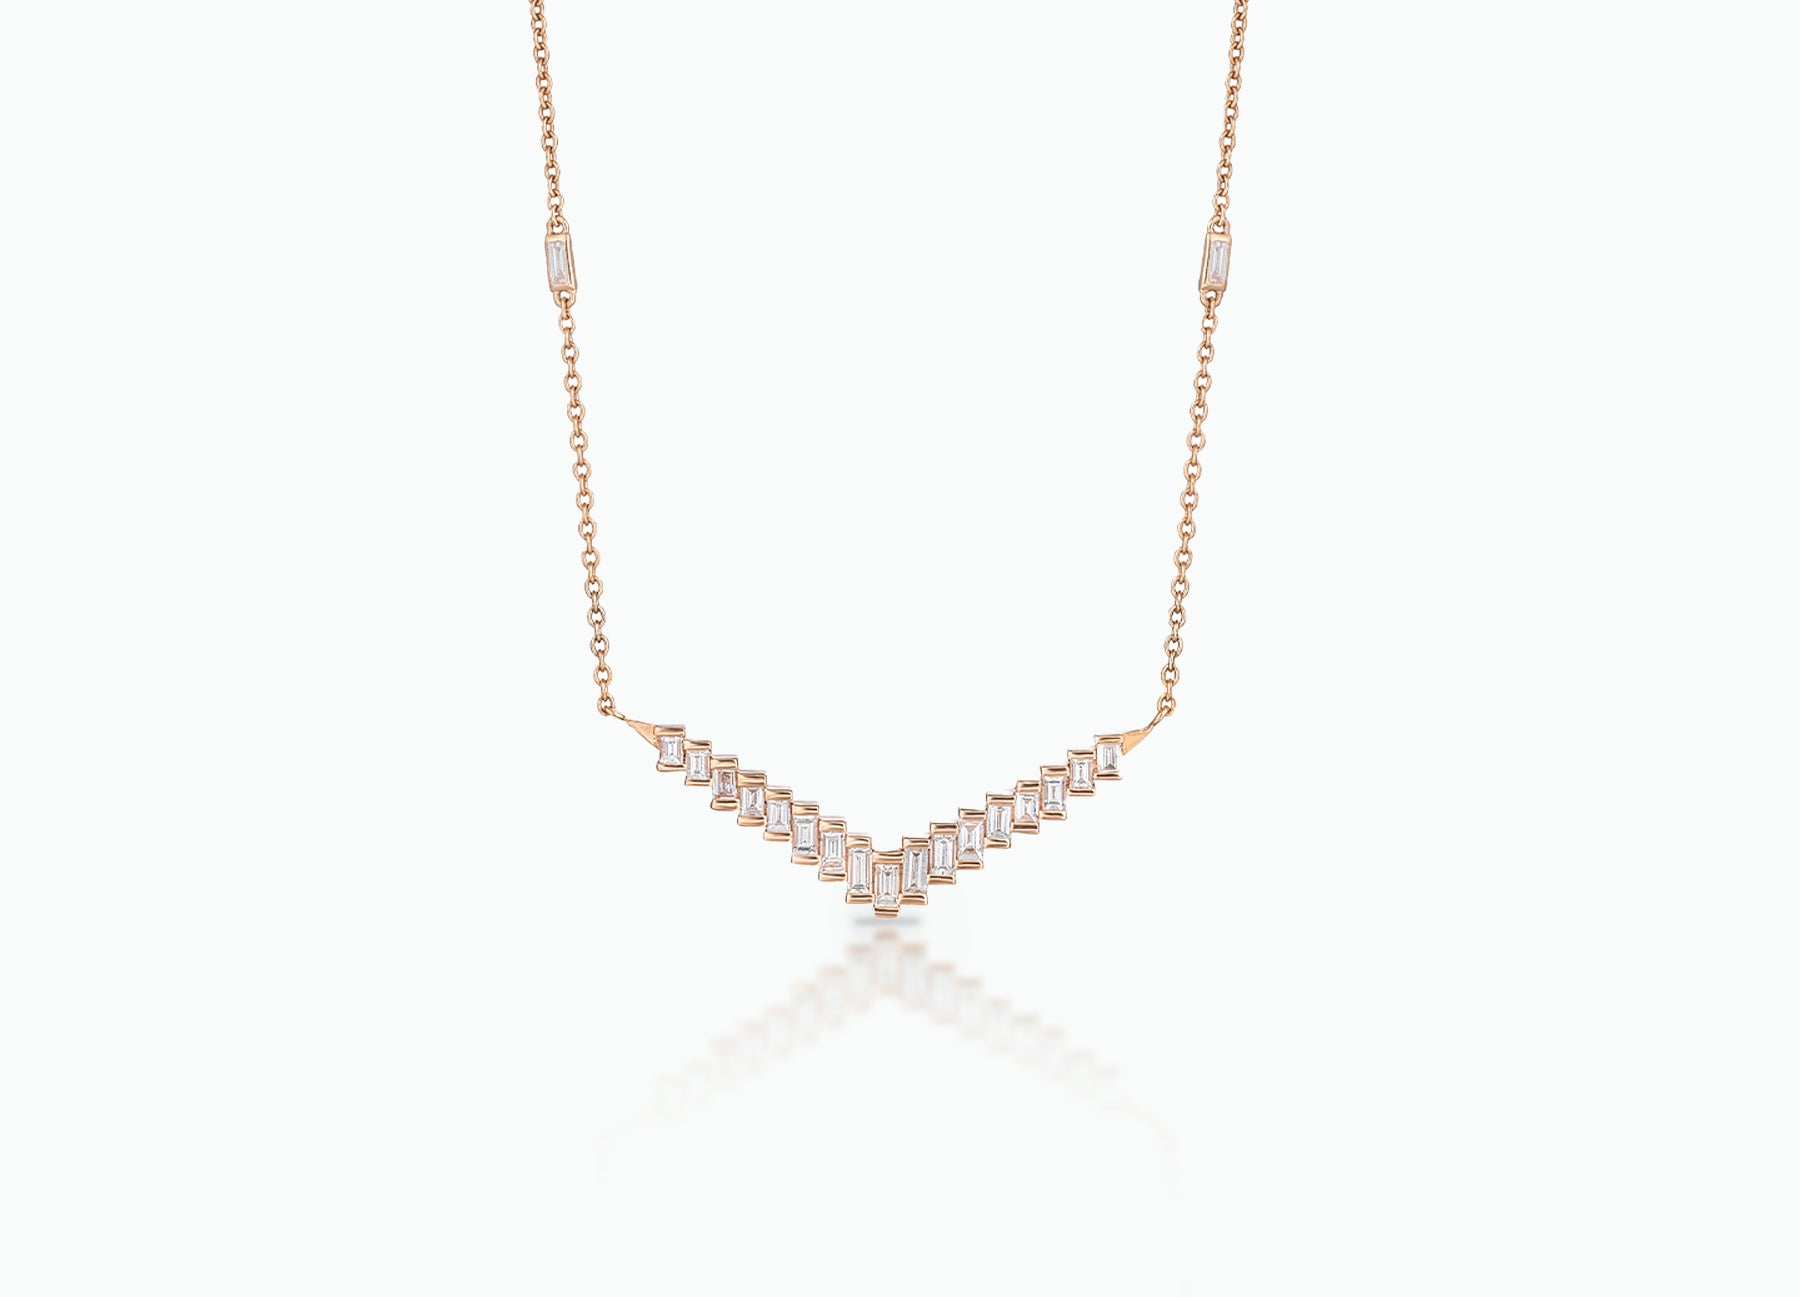 Pendant with baguette white Diamonds that create a chevron pattern. Made from rose, yellow or white 18k Gold.